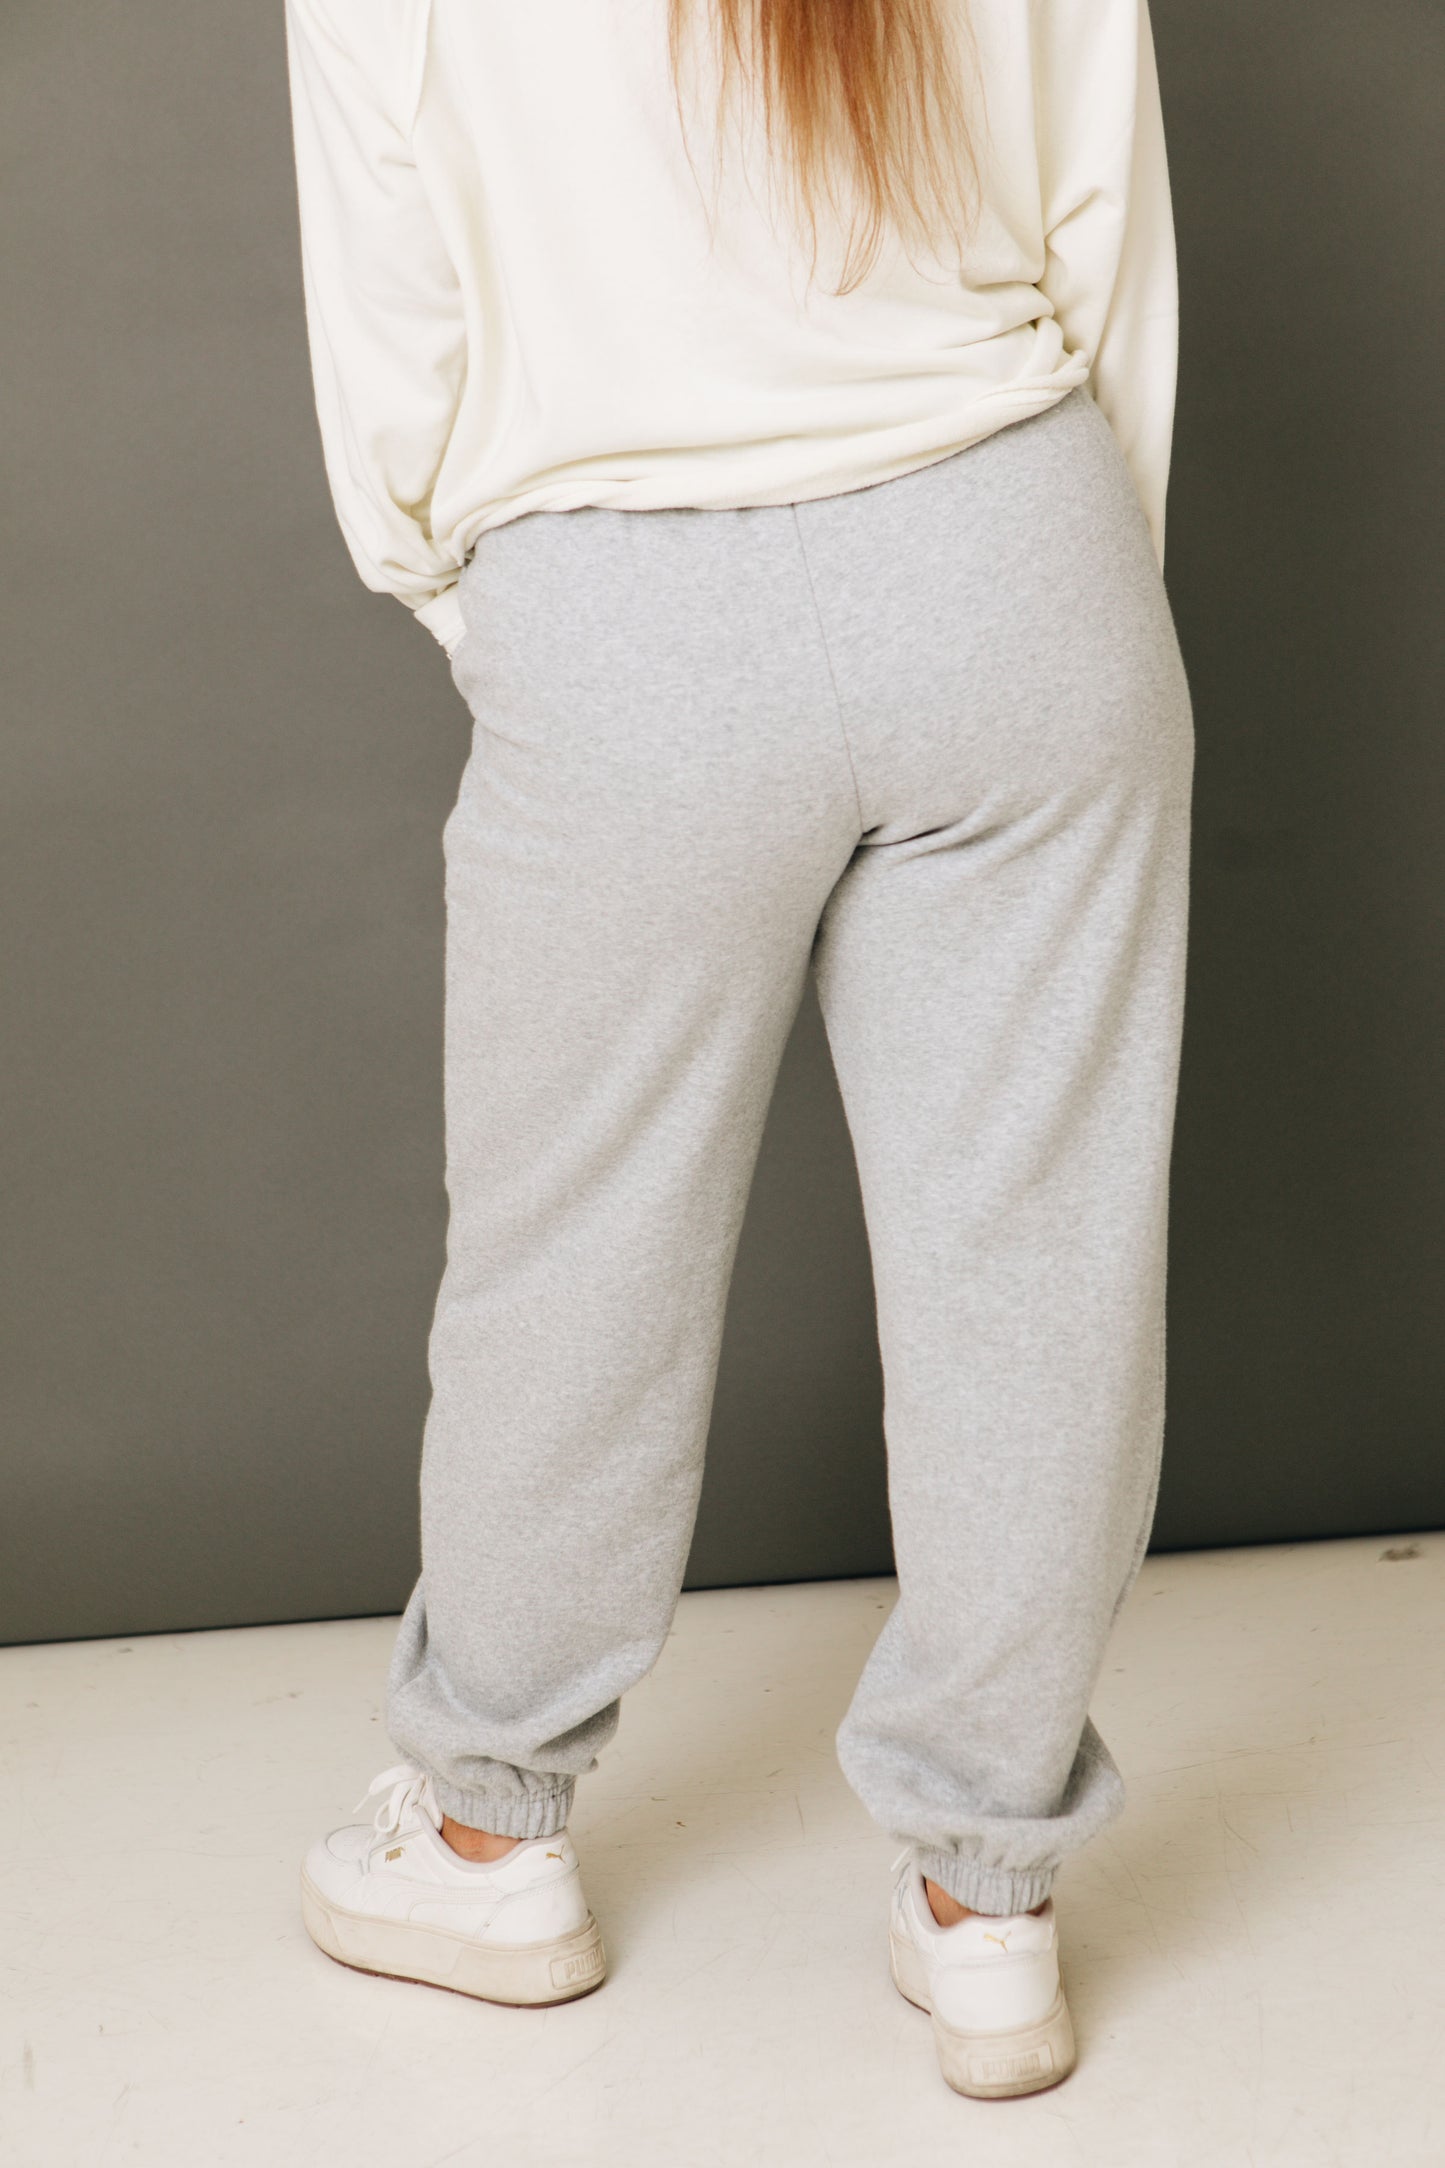 Your Most Favorite Sweats - Casual High-Waist Drawstring Sweats (S-L)